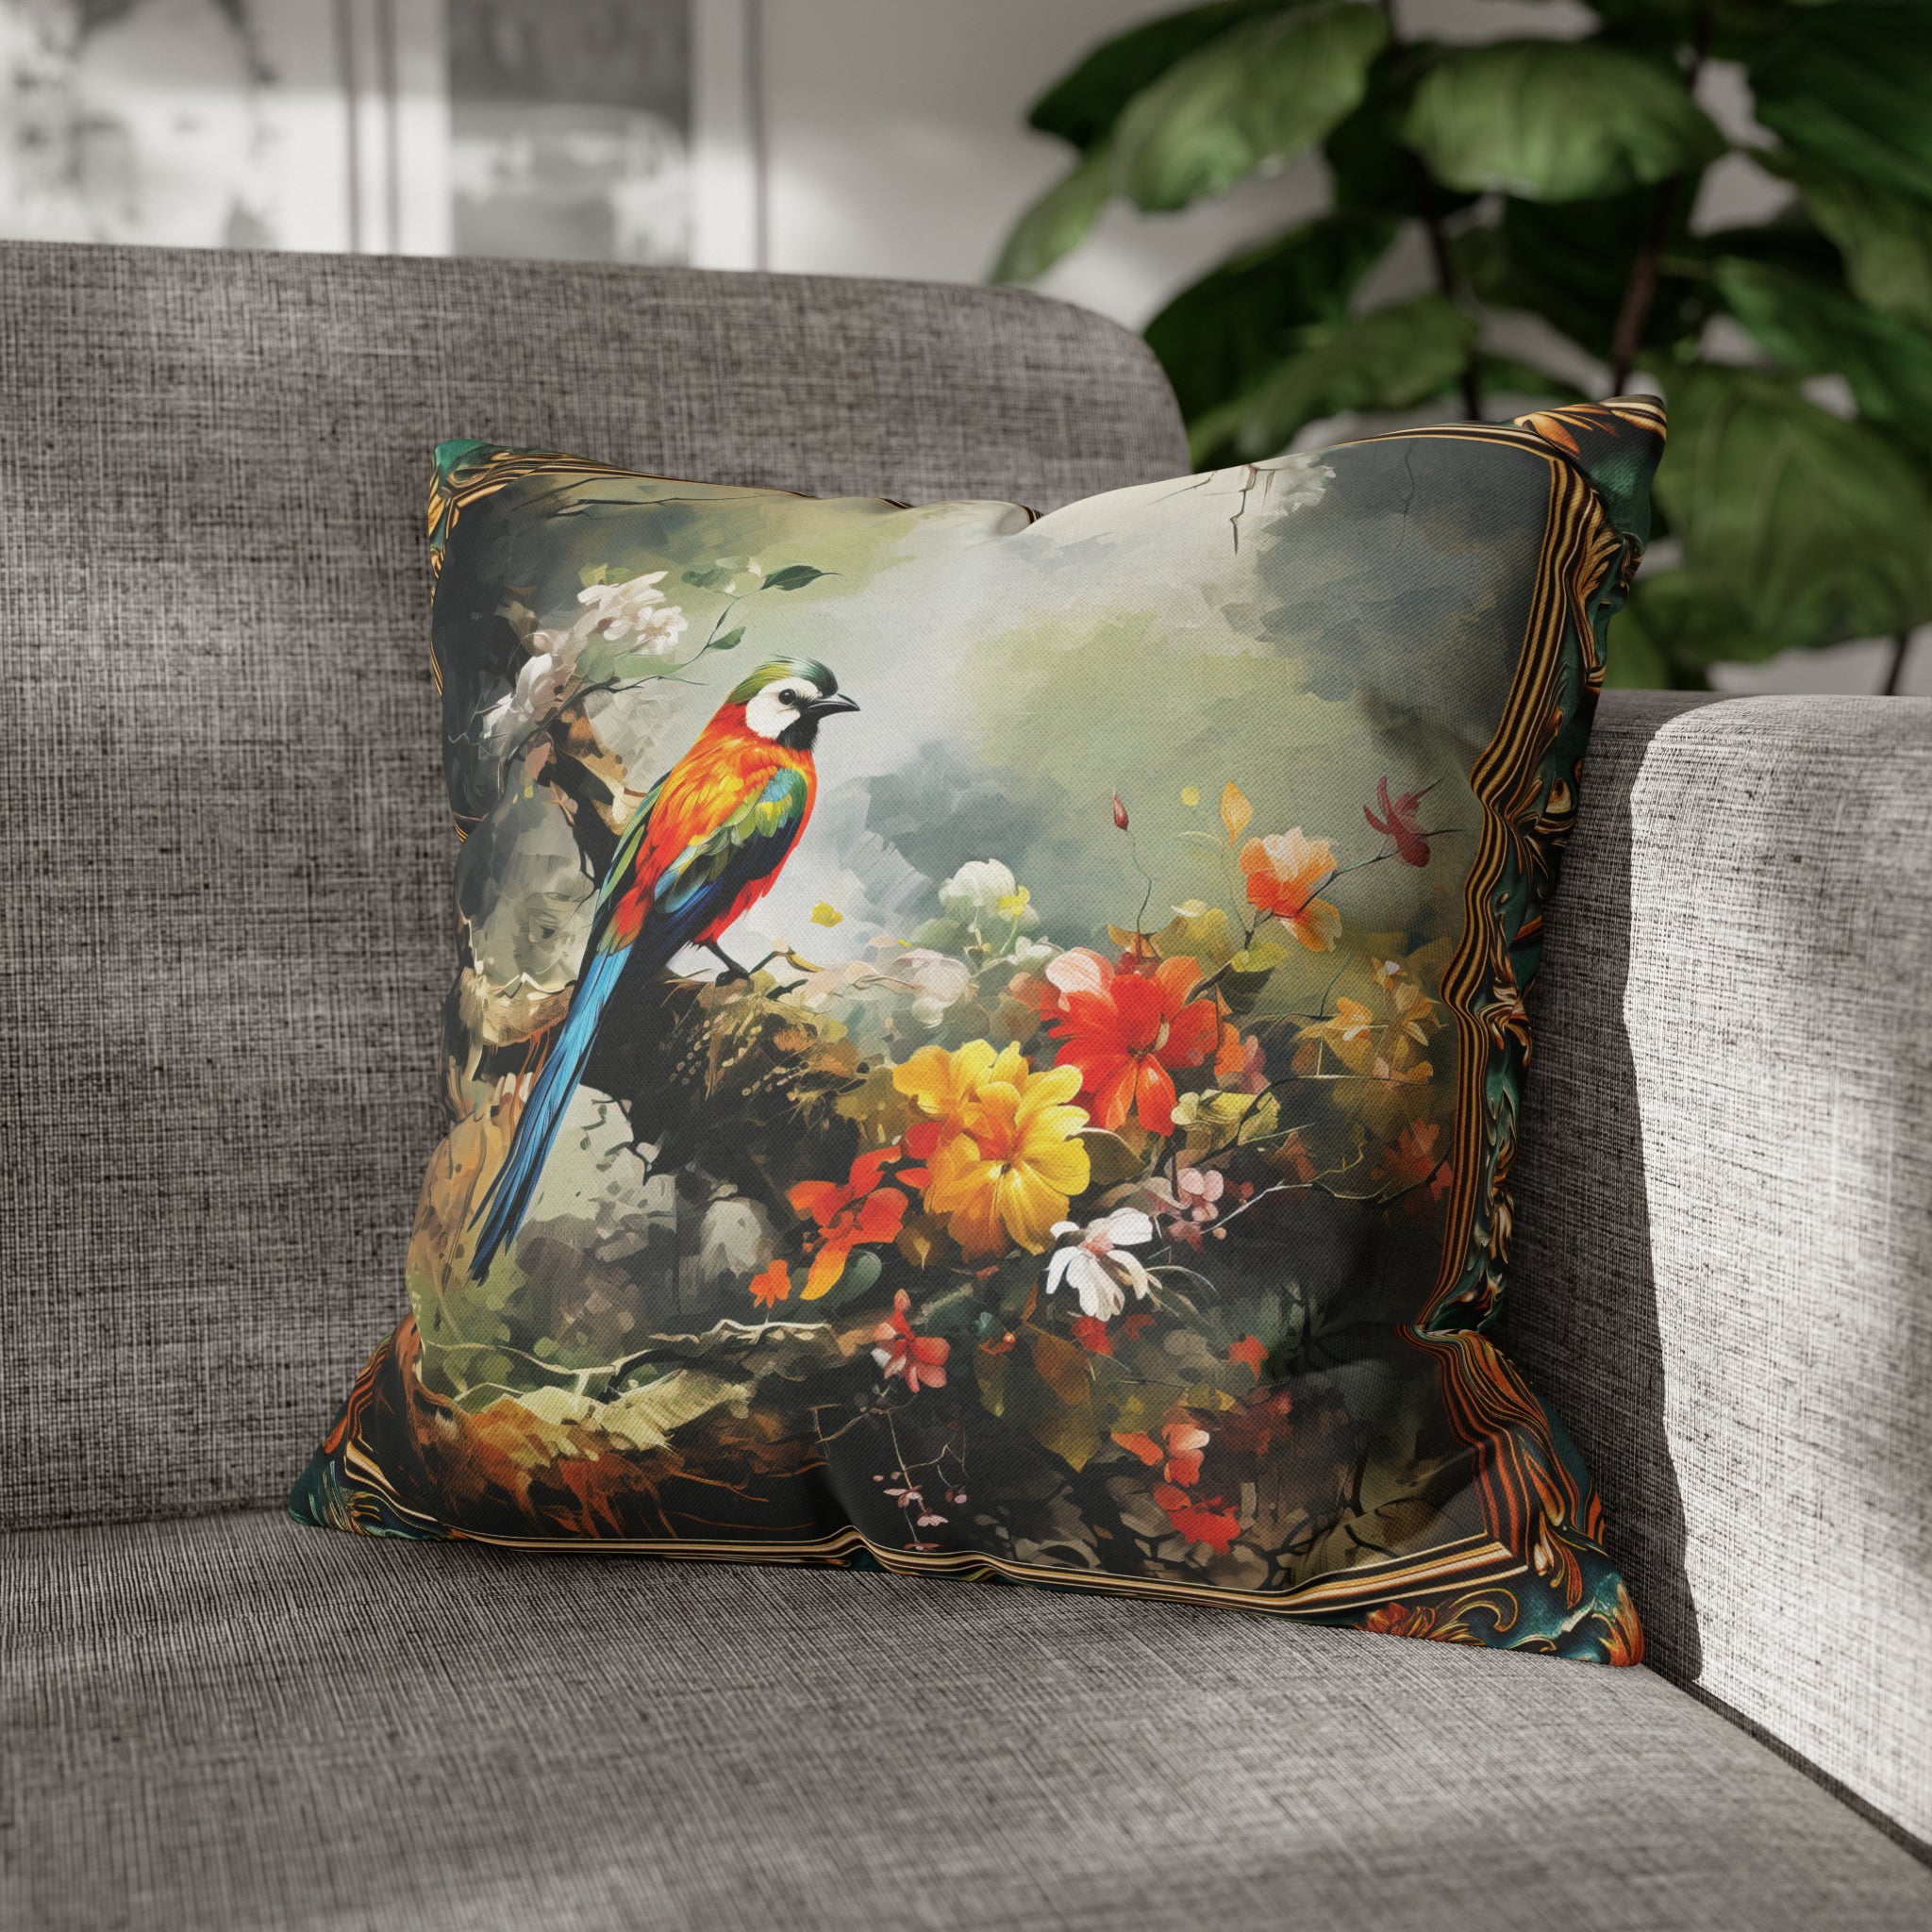 Square Pillow Case 18" x 18", CASE ONLY, no pillow form, original Art , a Colorful Green headed Bird on a Flowering Tree Branch